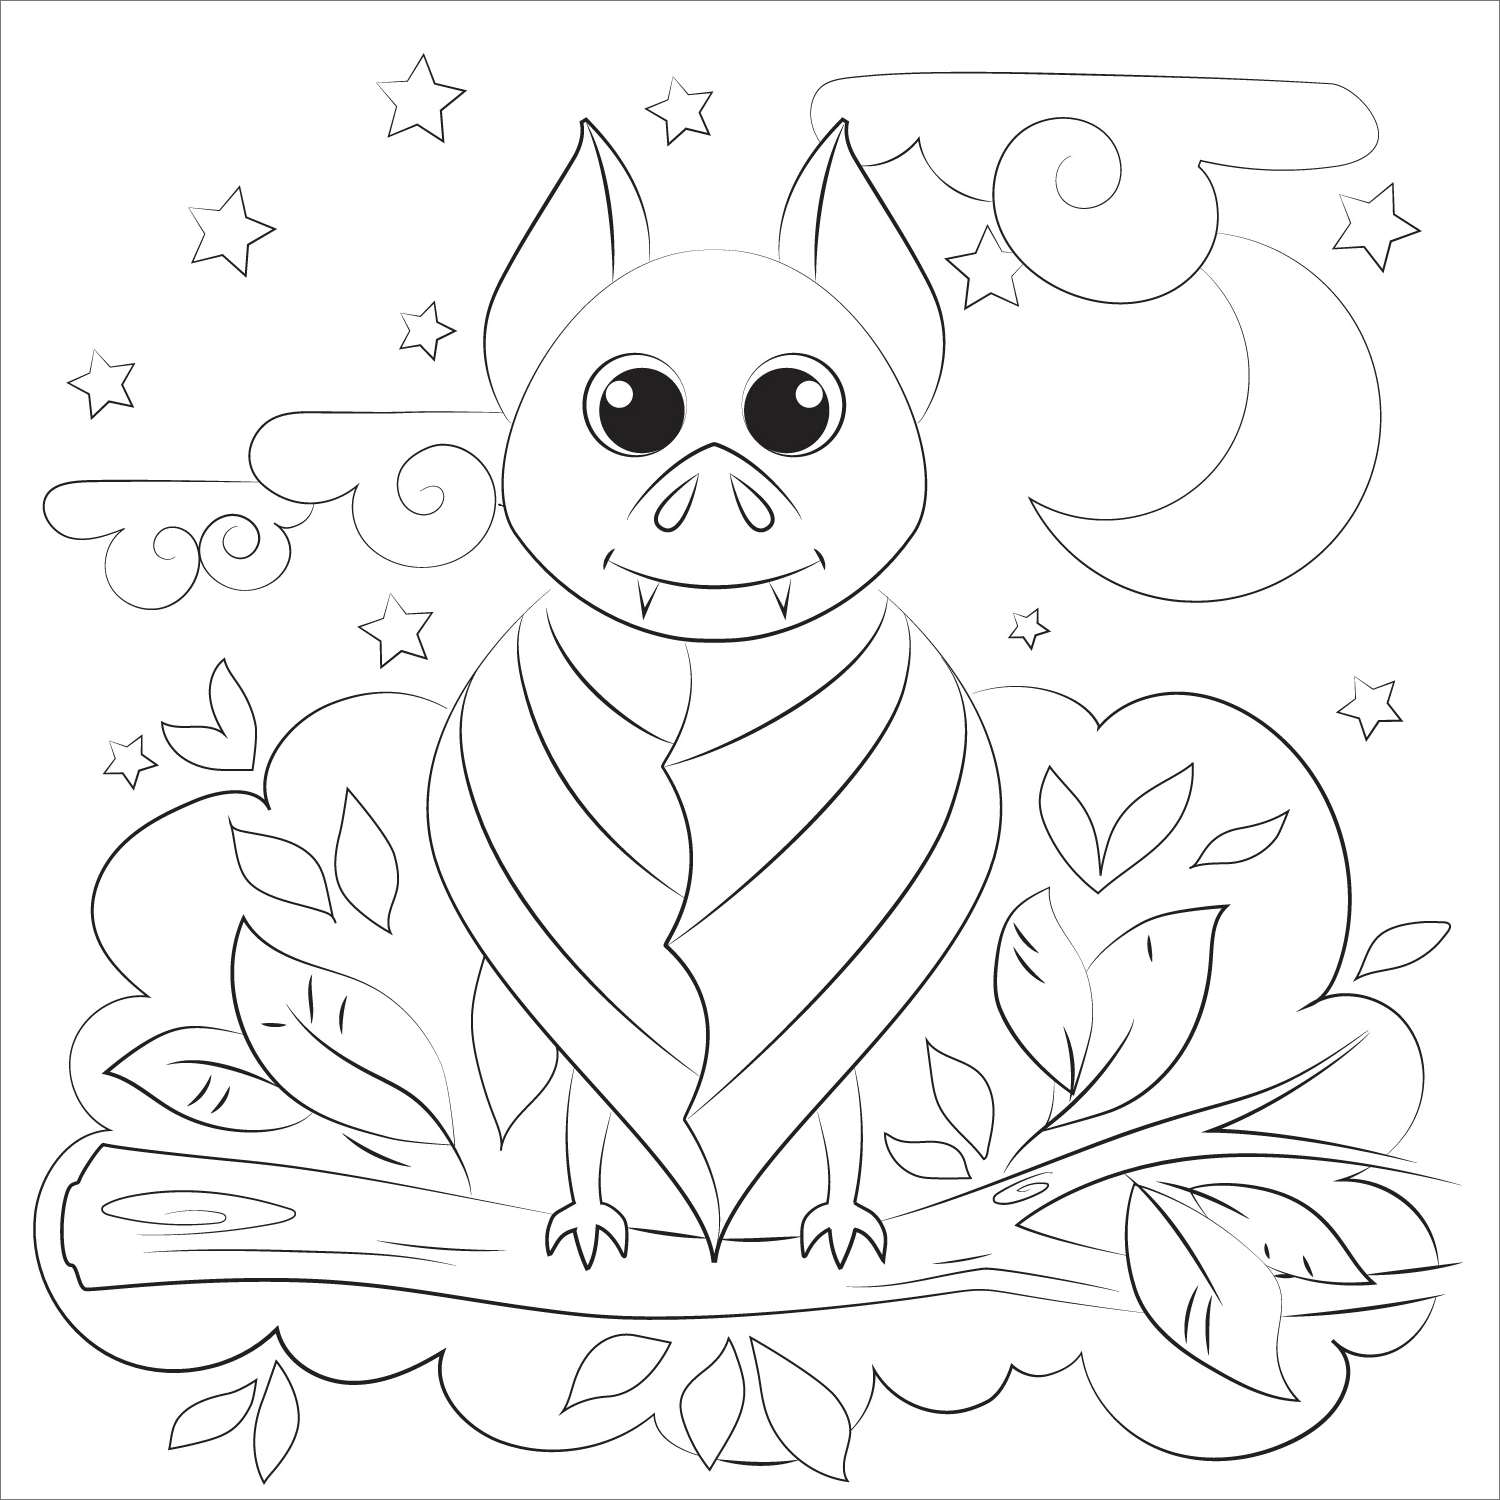 Free Coloring Image For Us Coloring Page